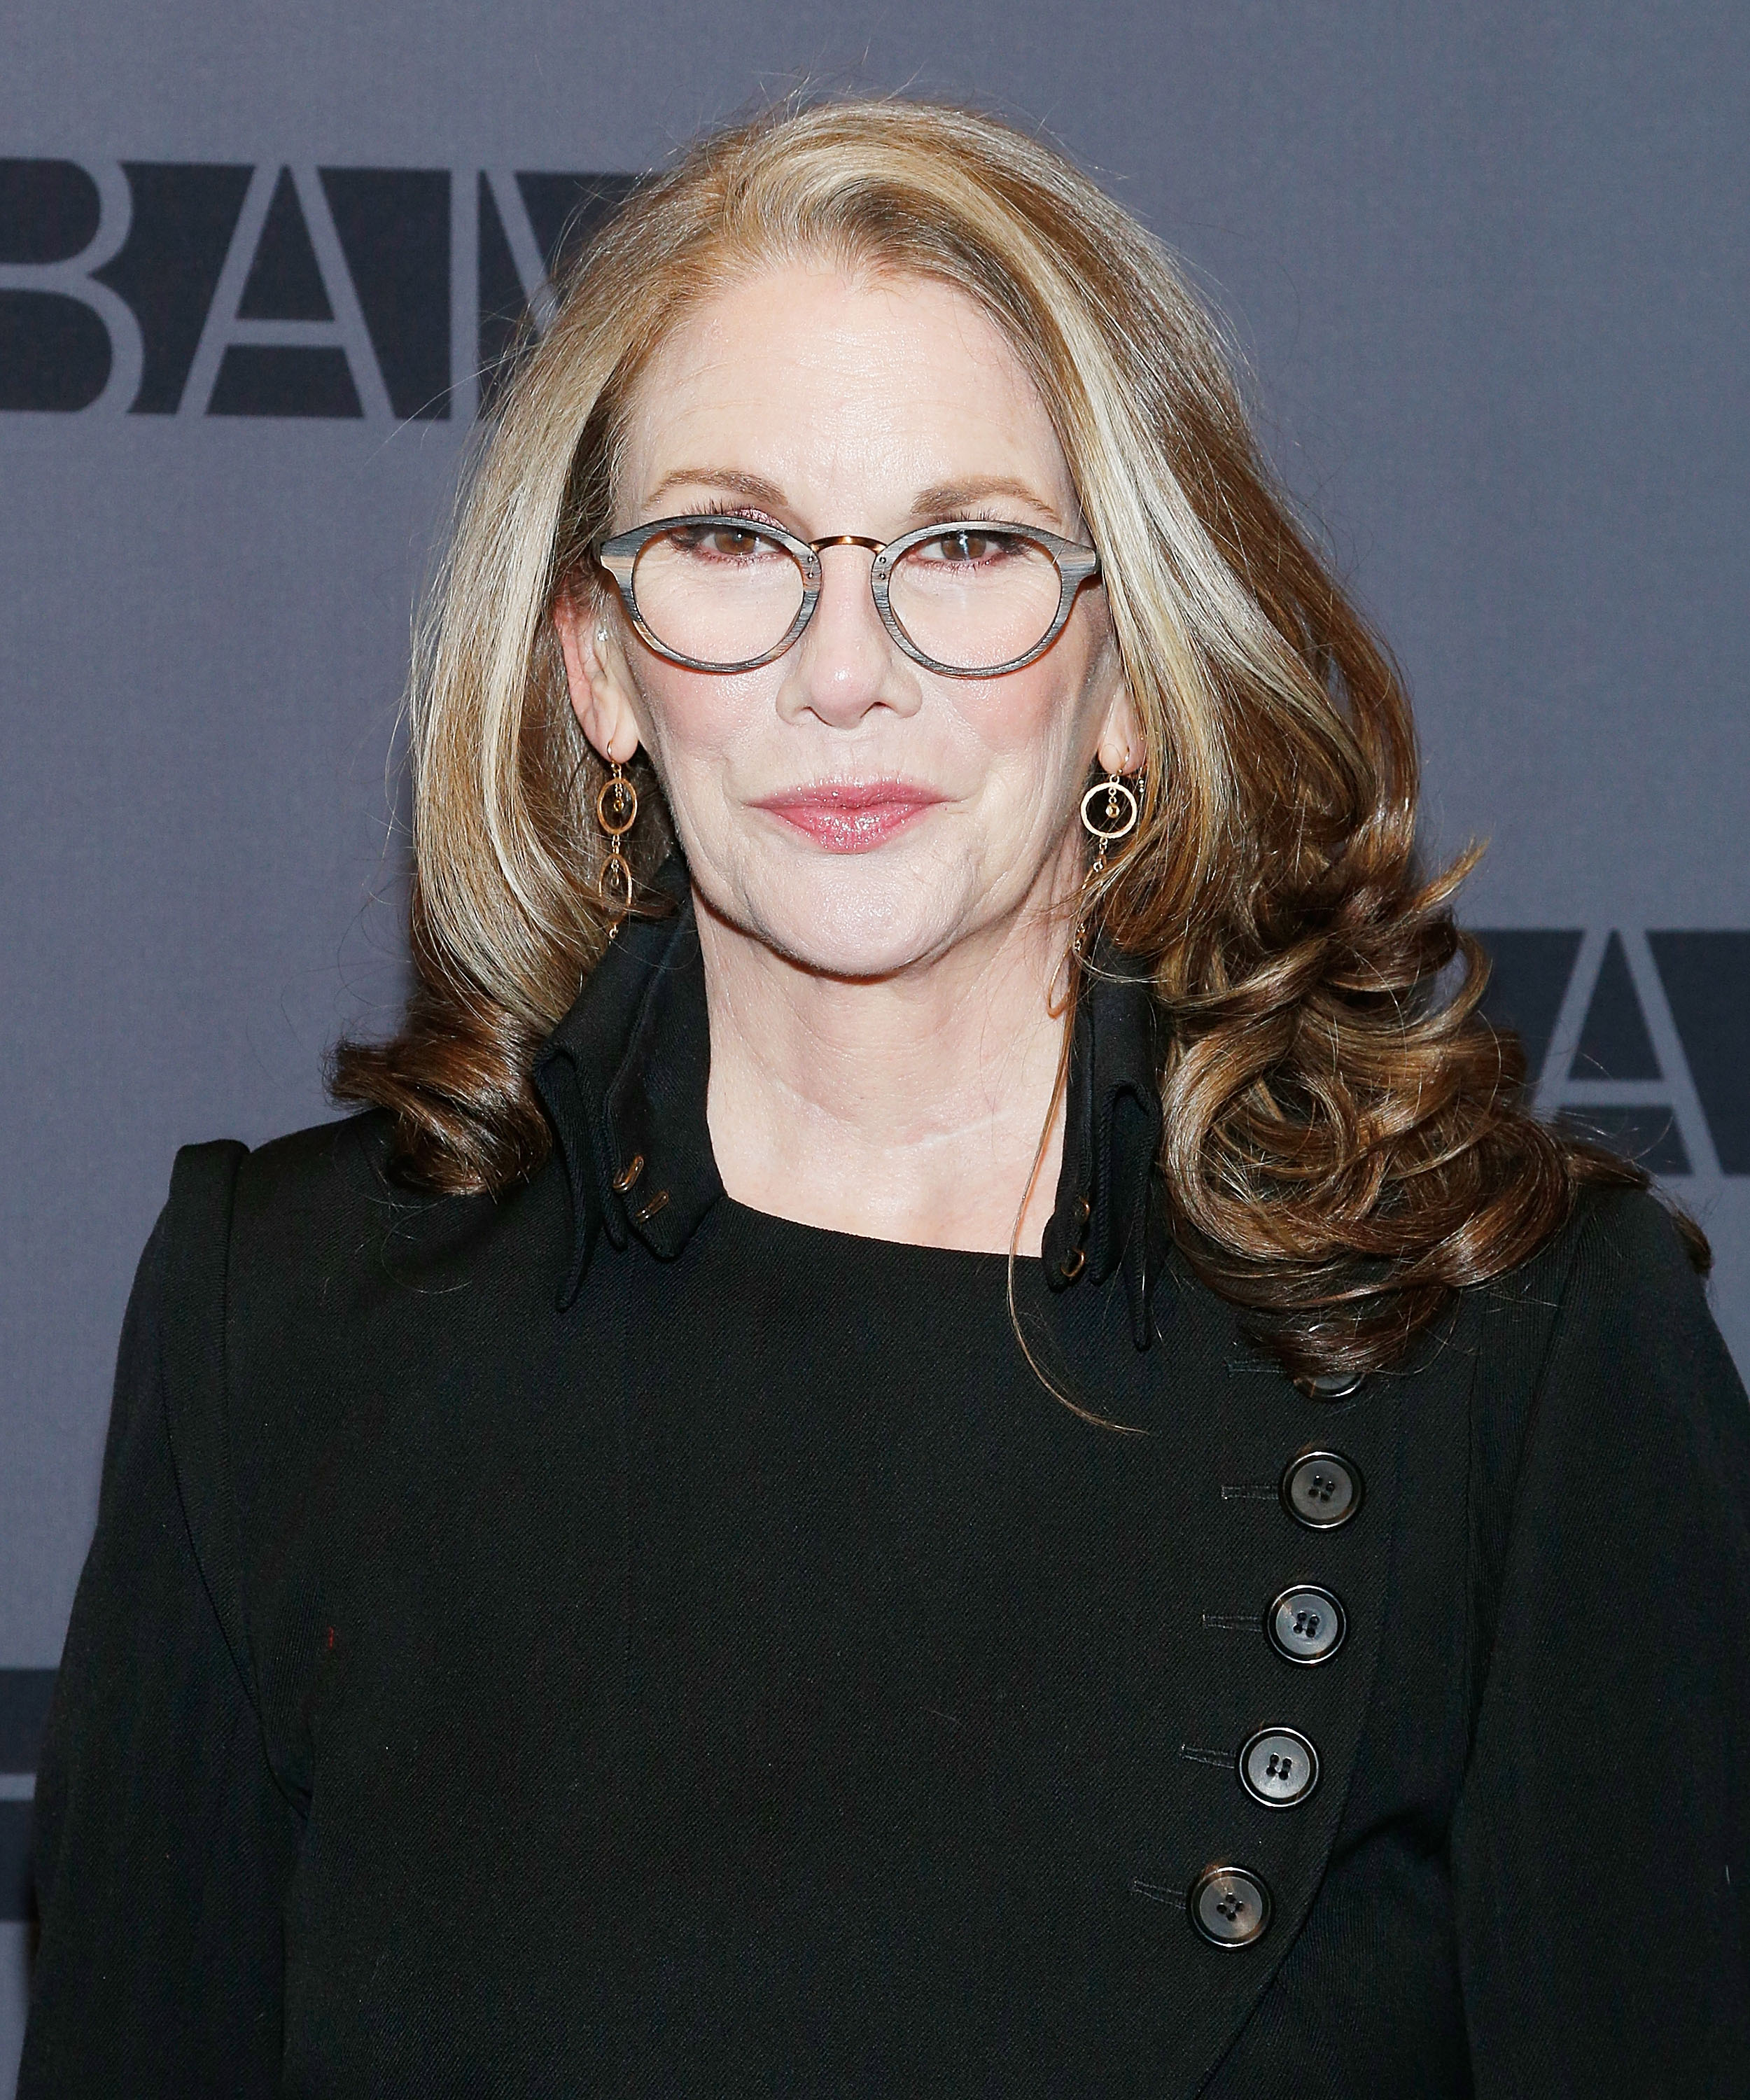 Melissa Gilbert at the opening night party for "Medea" on January 30, 2020 | Source: Getty Images